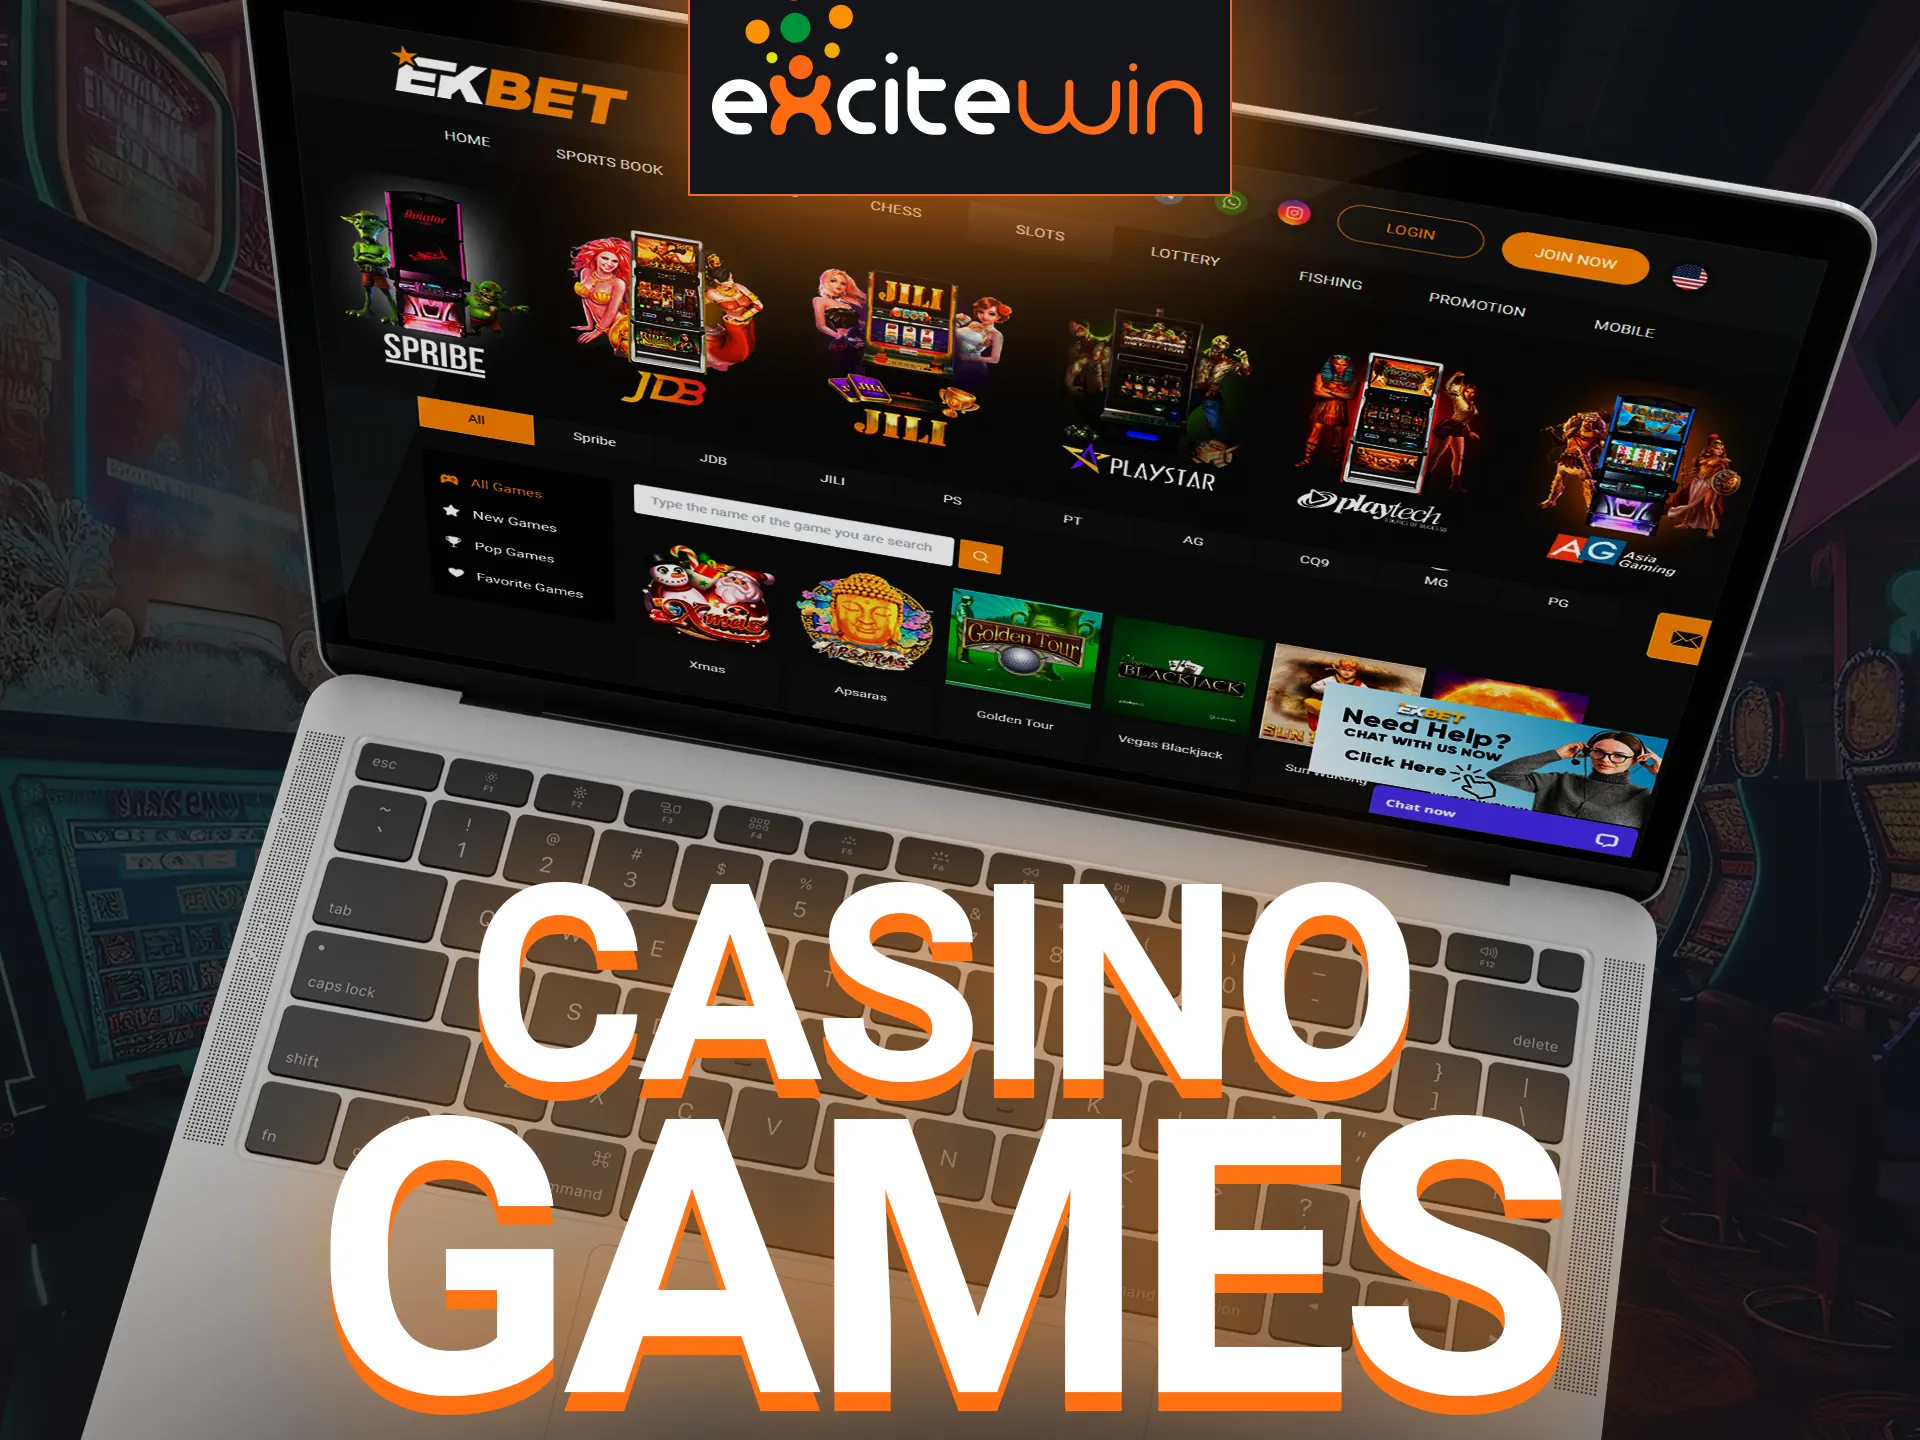 Excitewin provides a wide range of casino games.